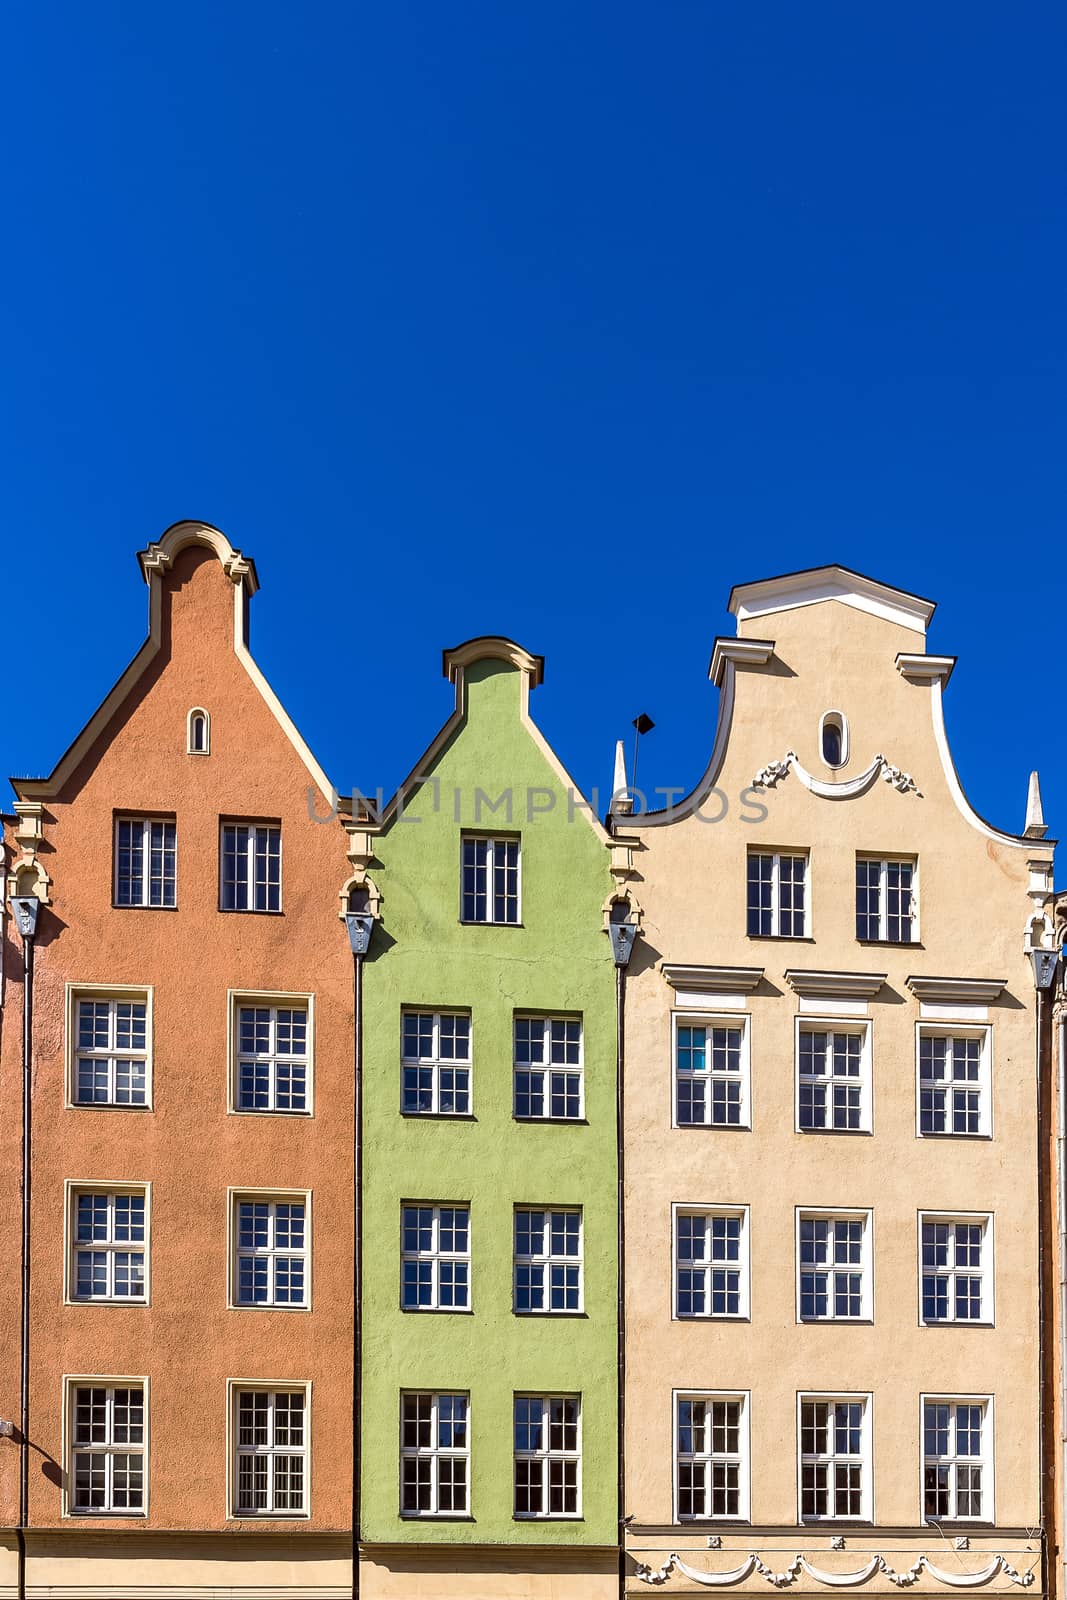 Facades of ancient tenements in the old town in Gdansk, Poland.